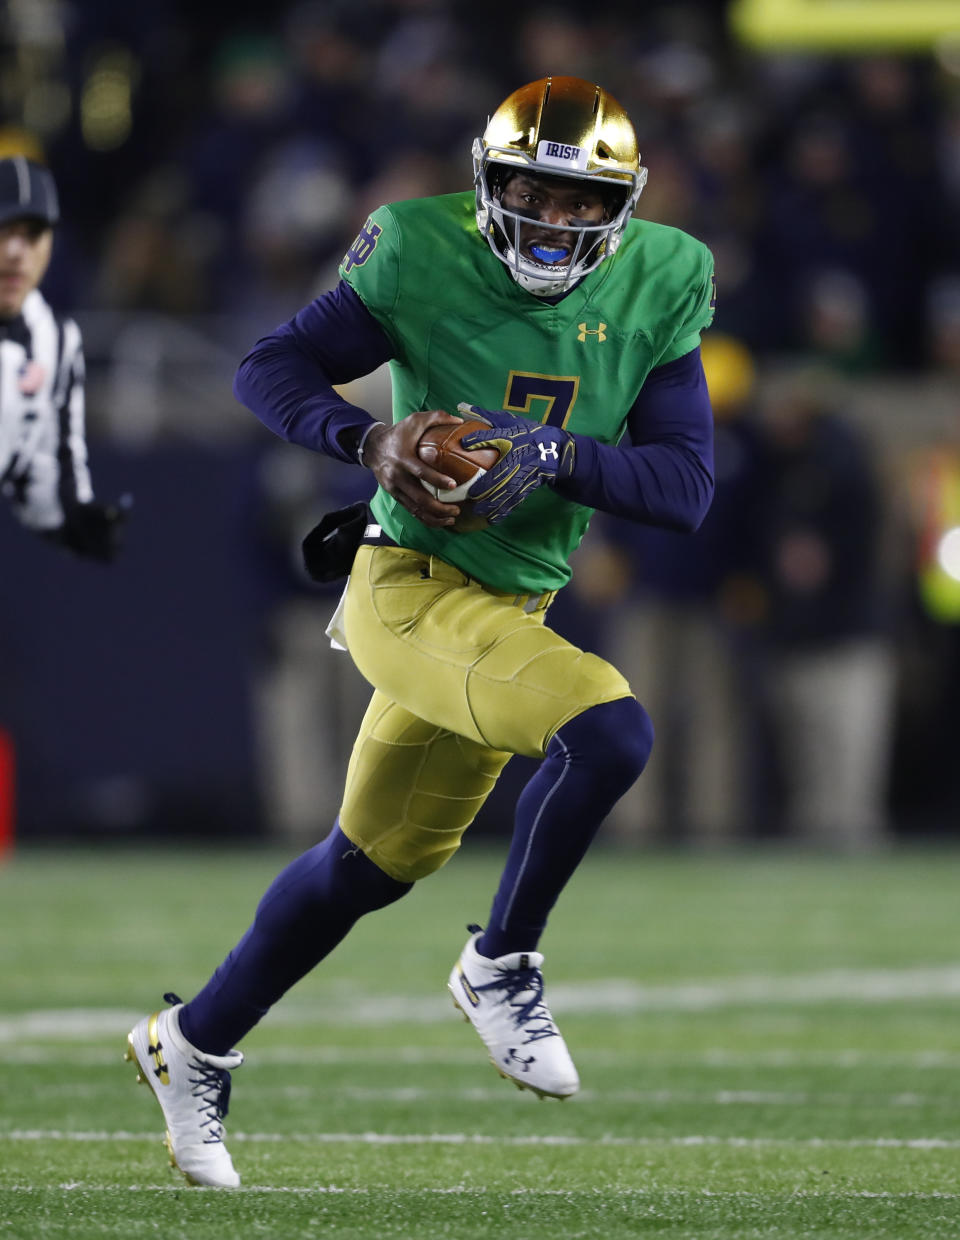 Notre Dame quarterback Brandon Wimbush (7) runs the ball against Florida State in the first half of an NCAA college football game in South Bend, Ind., Saturday, Nov. 10, 2018. (AP Photo/Paul Sancya)